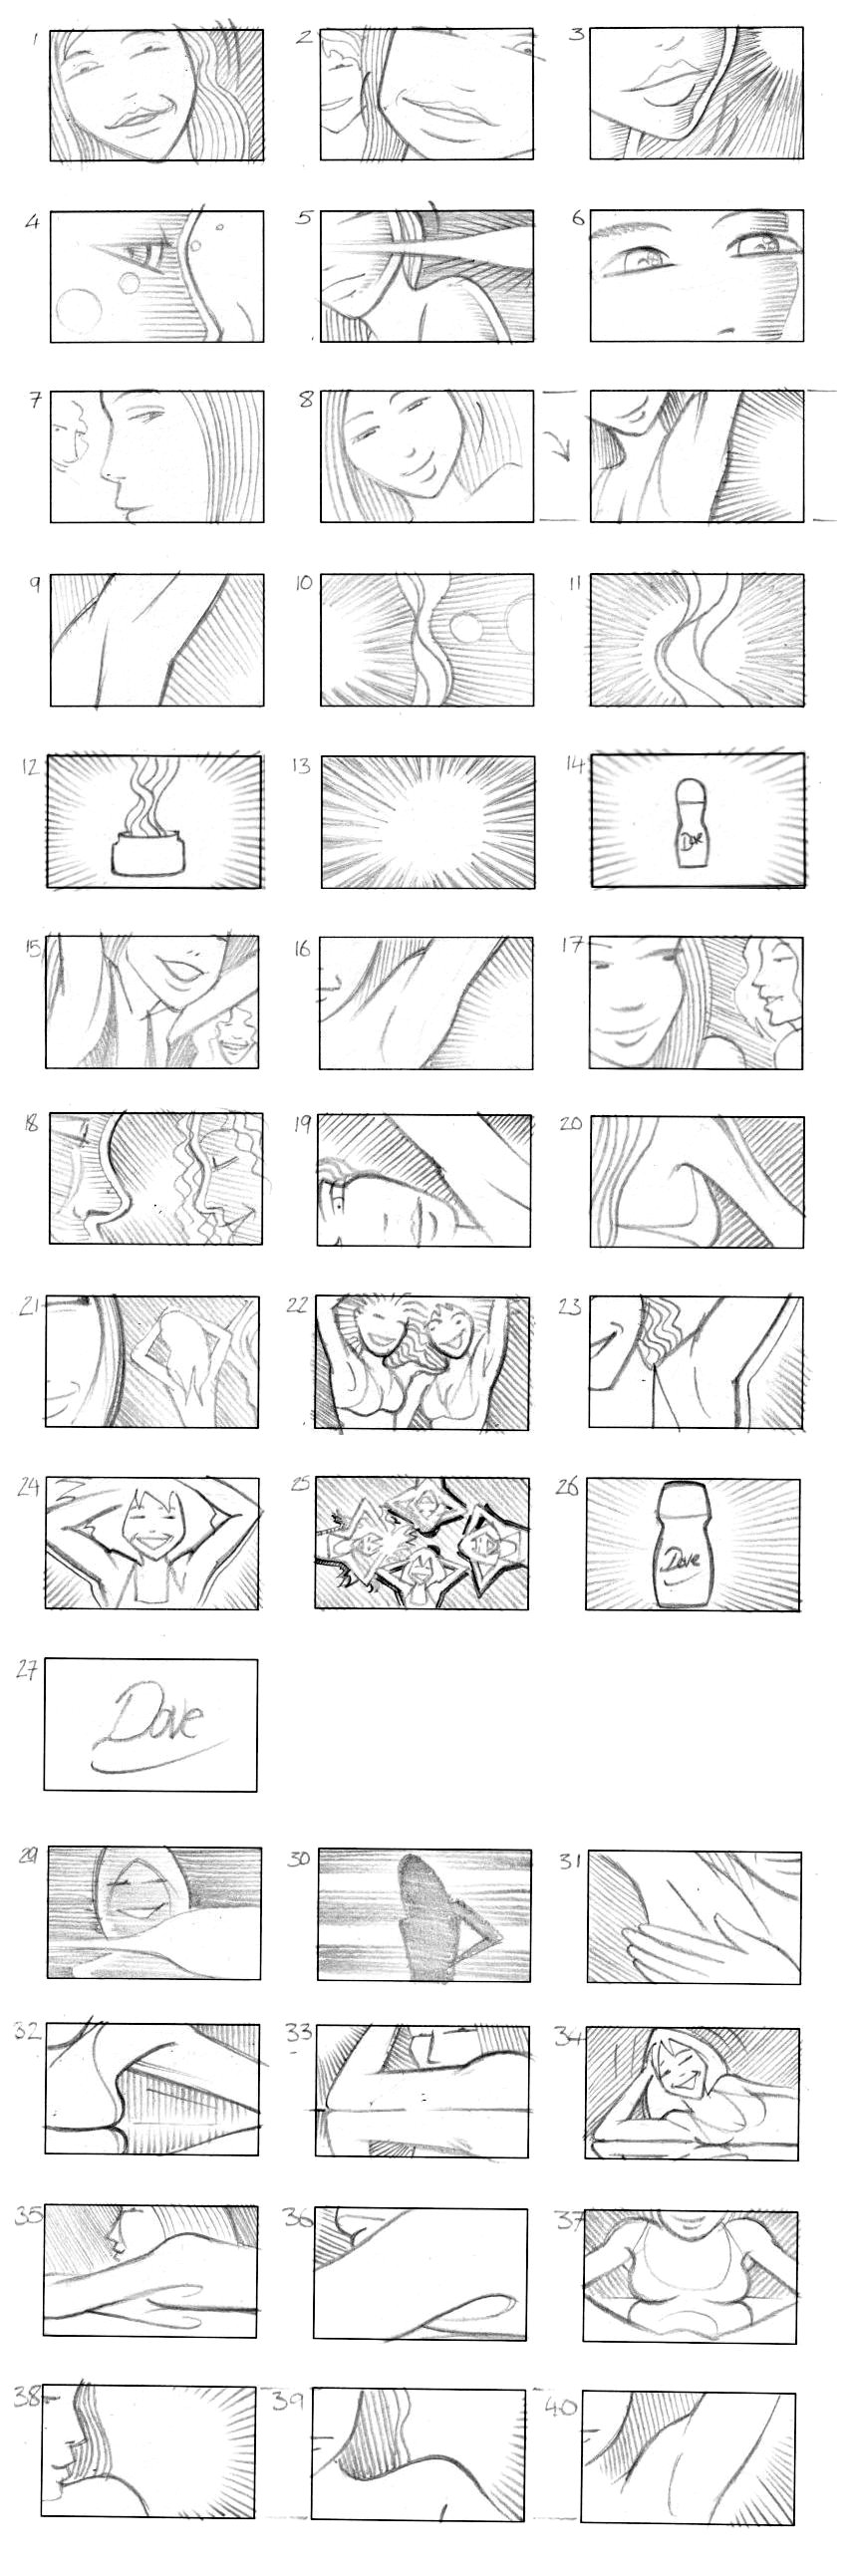 DOVE 'QUICKIES' STORYBOARD BY ANDY SPARROW